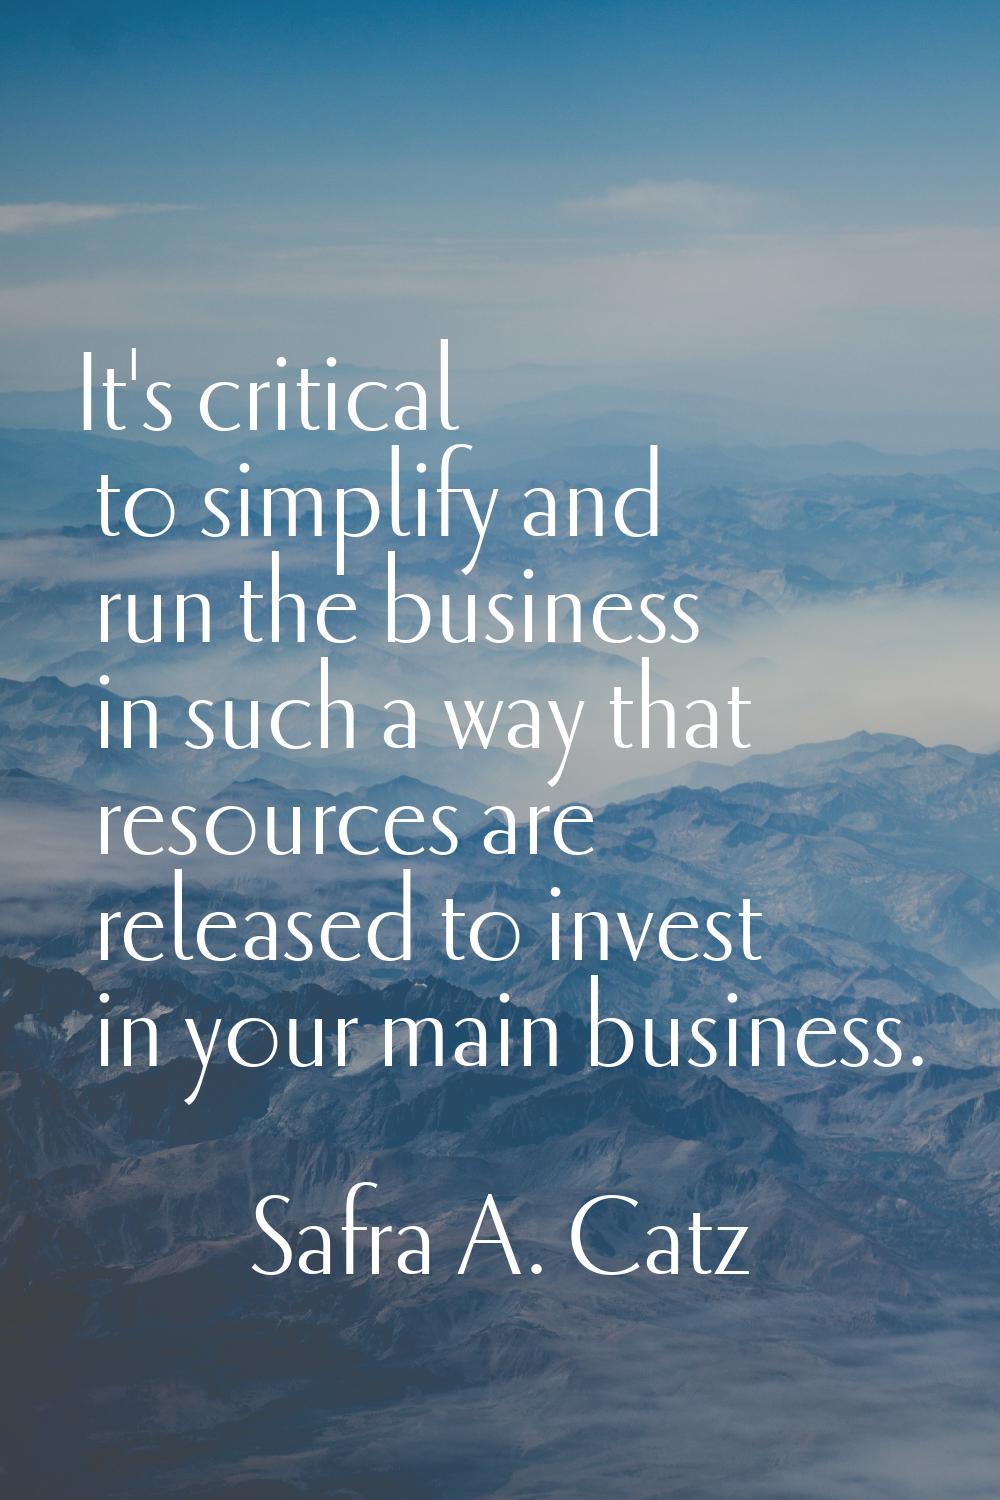 It's critical to simplify and run the business in such a way that resources are released to invest 